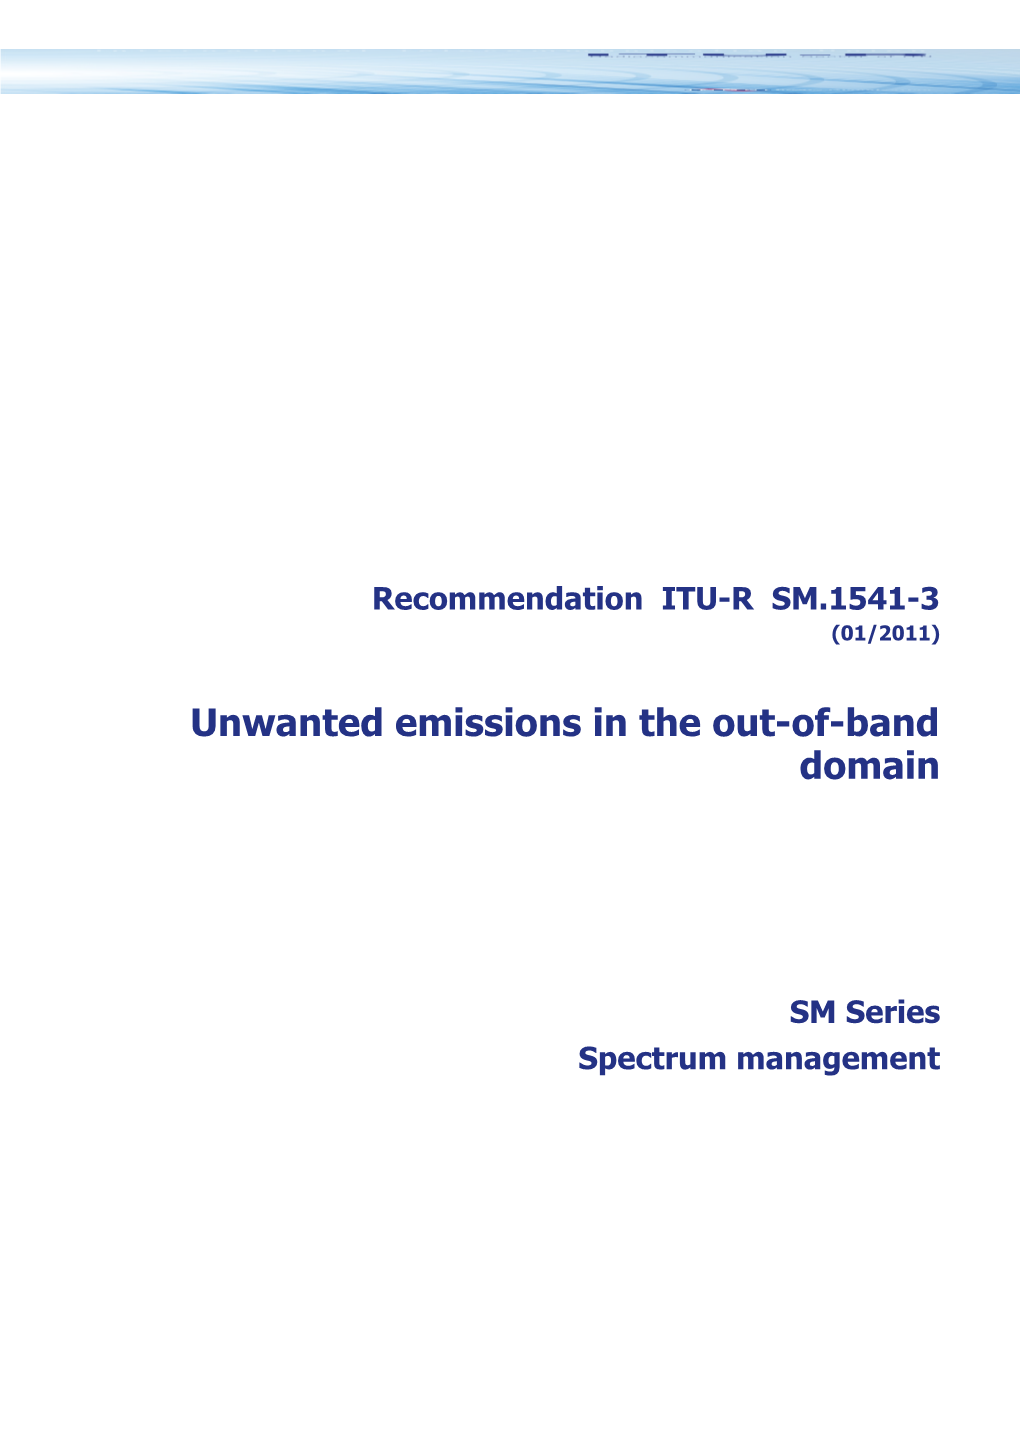 RECOMMENDATION ITU-R SM.1541-3* - Unwanted Emissions in the Out-Of-Band Domain